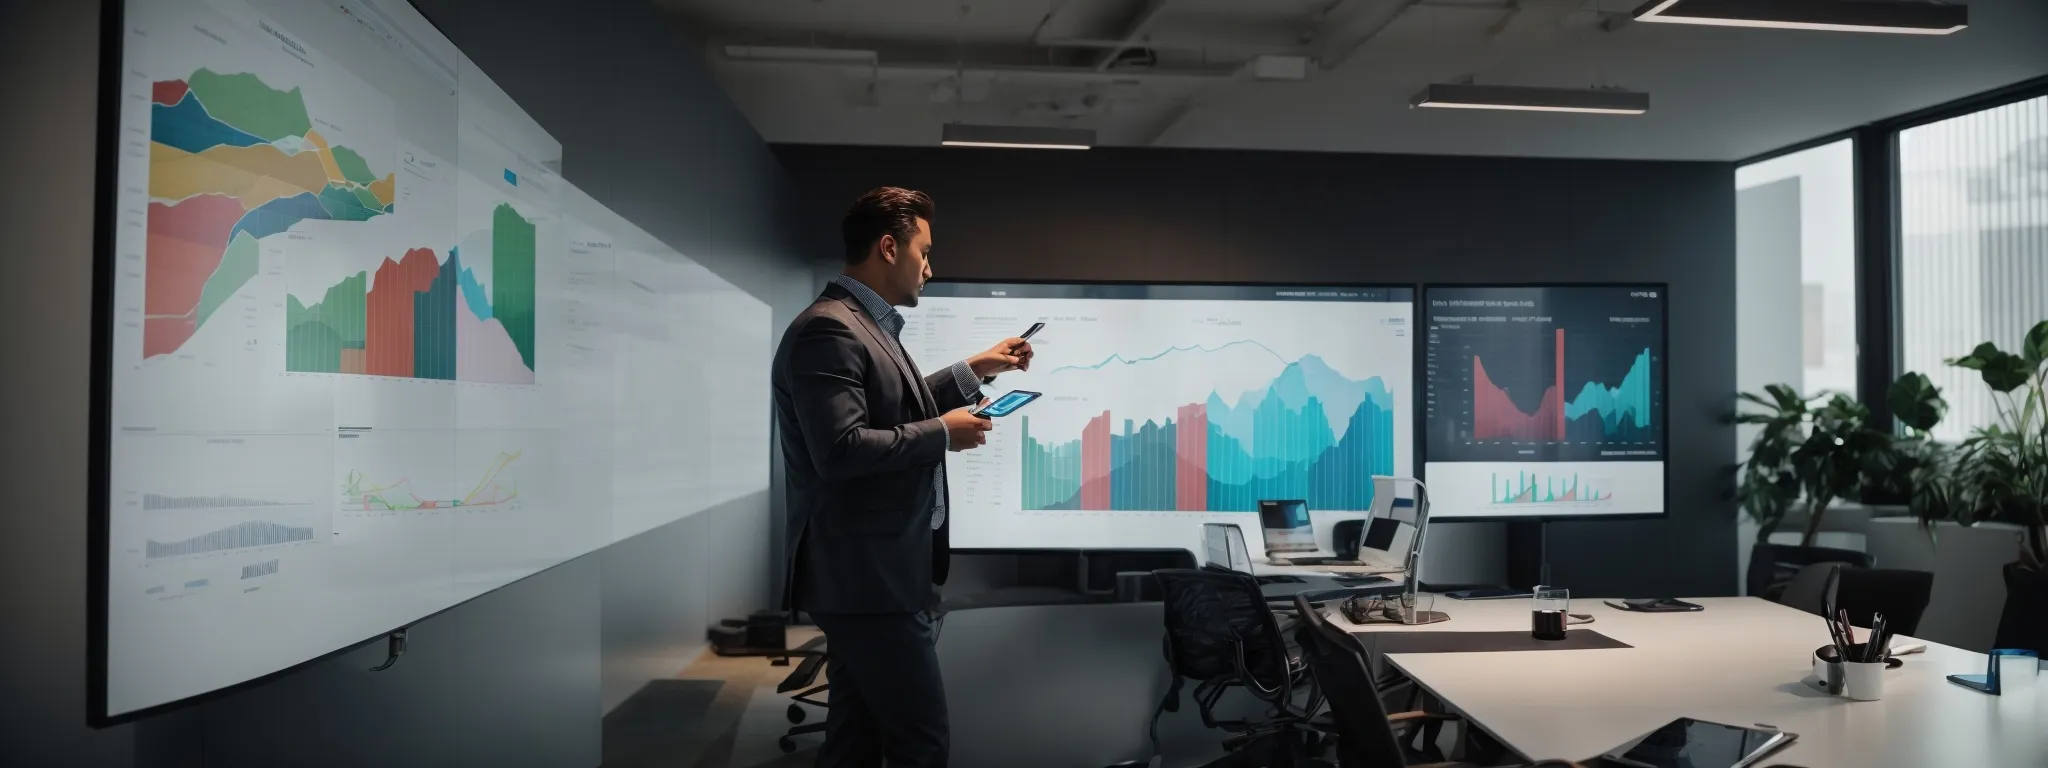 a professional in a modern office points to an interactive screen displaying vibrant graphs and charts during an seo strategy presentation.